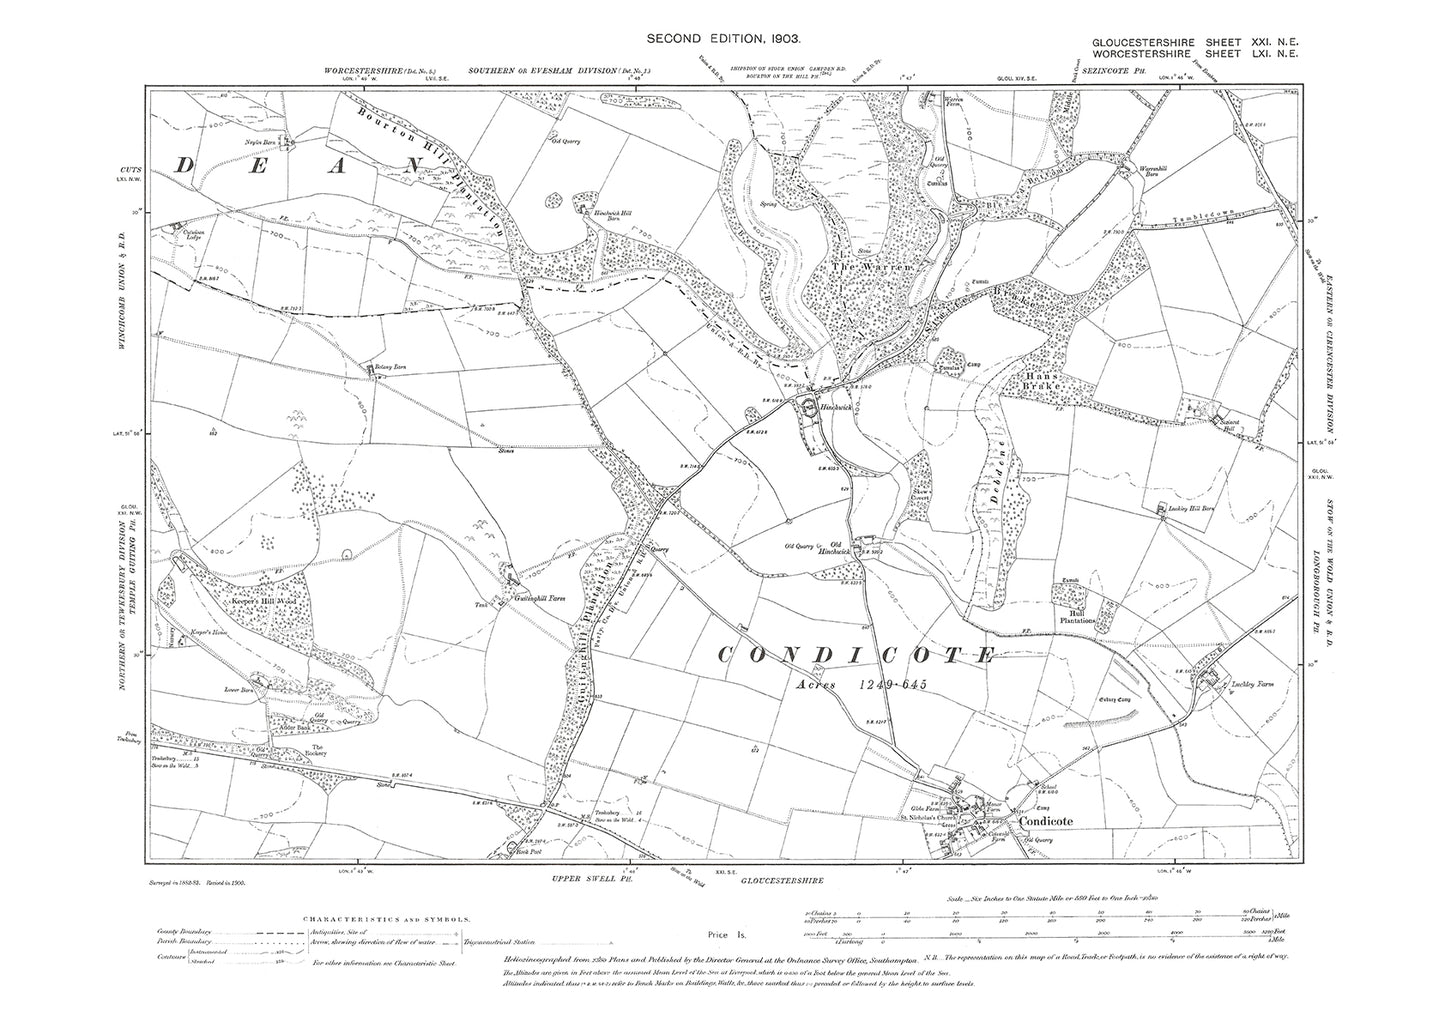 Old OS map dated 1903, showing Condicote in Gloucestershire - 21NE